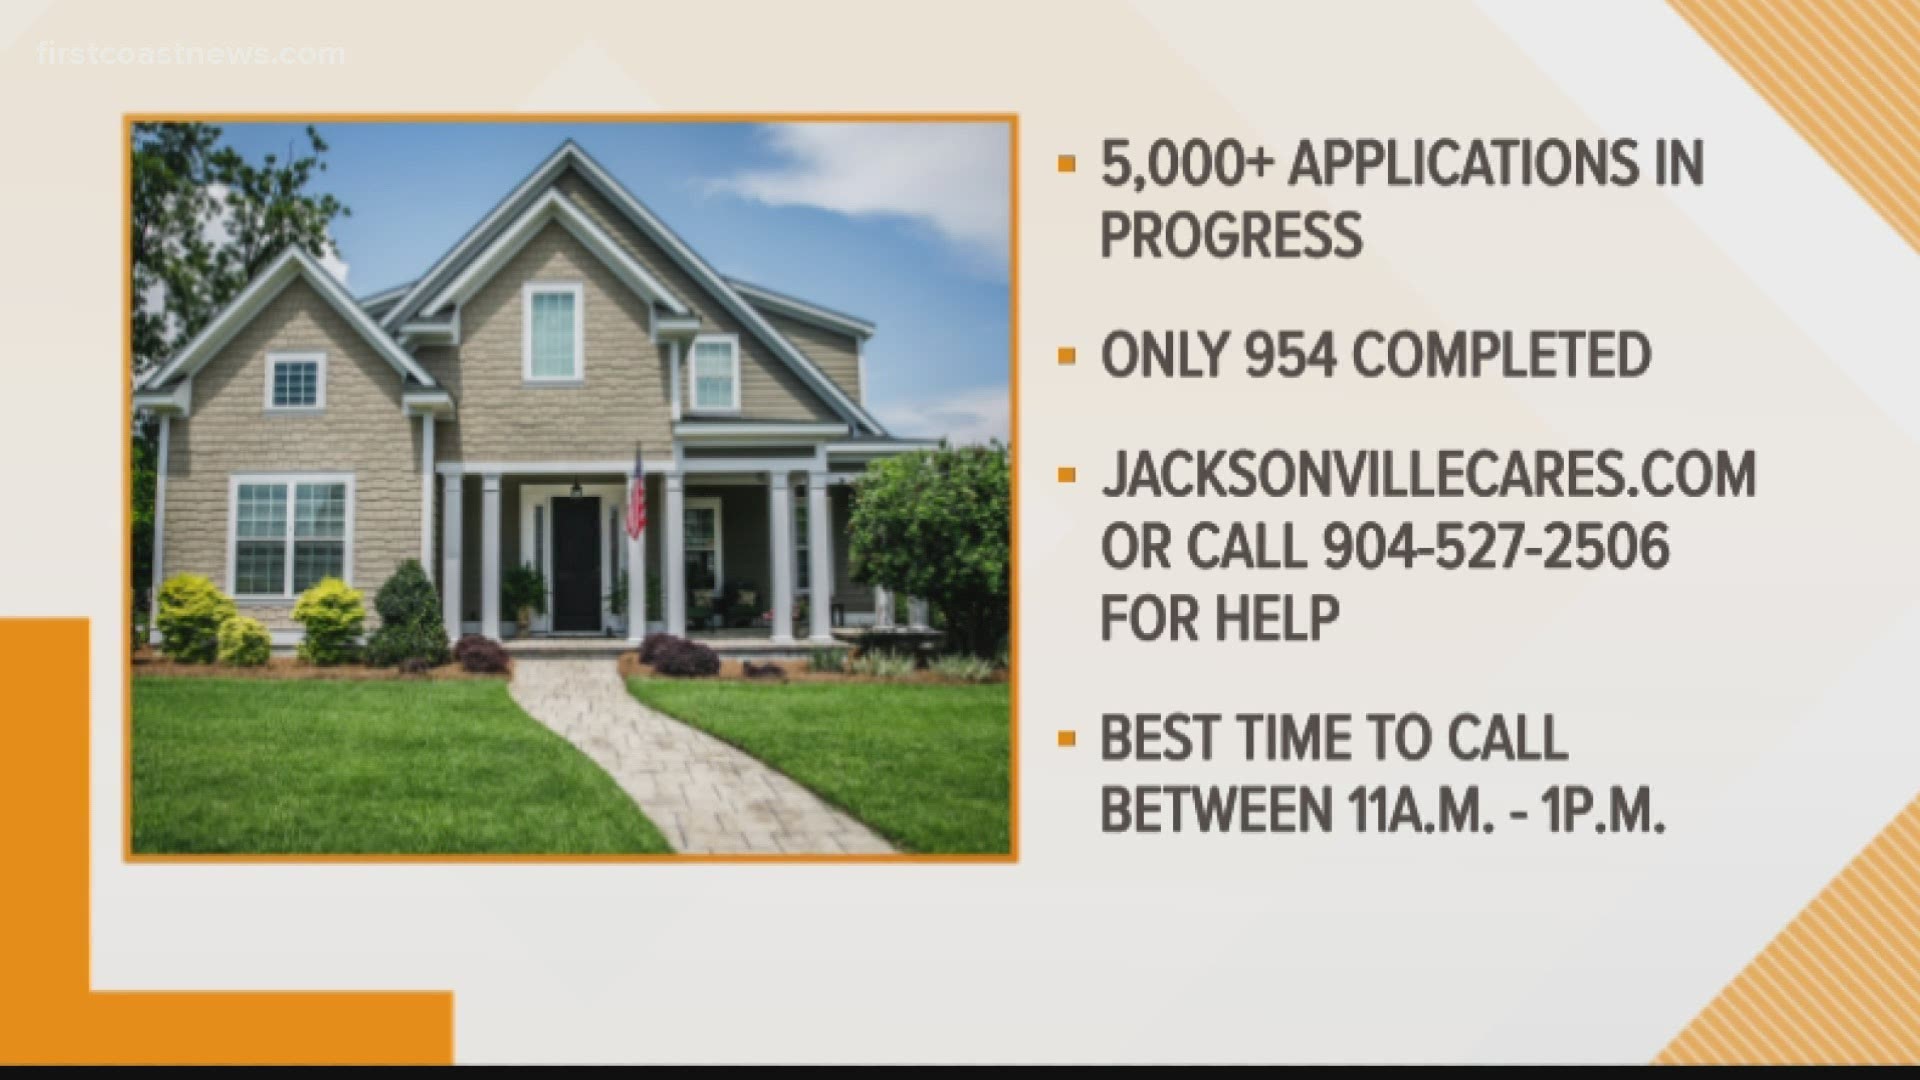 People could start seeing approvals this week for Jacksonville’s Eviction and Foreclosure Prevention program using CARES Act funds.